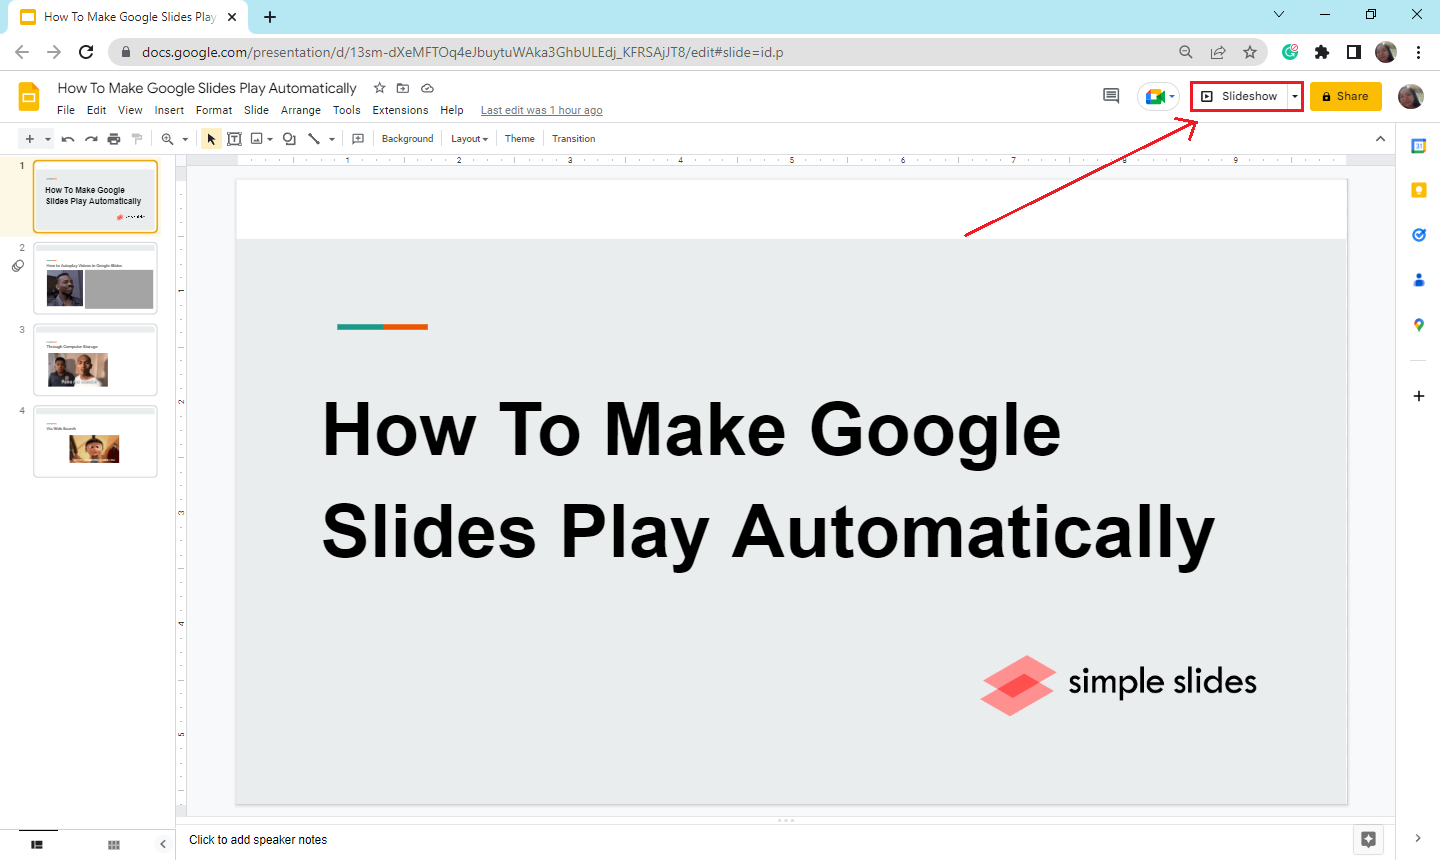 discover-how-to-make-google-slides-play-automatically